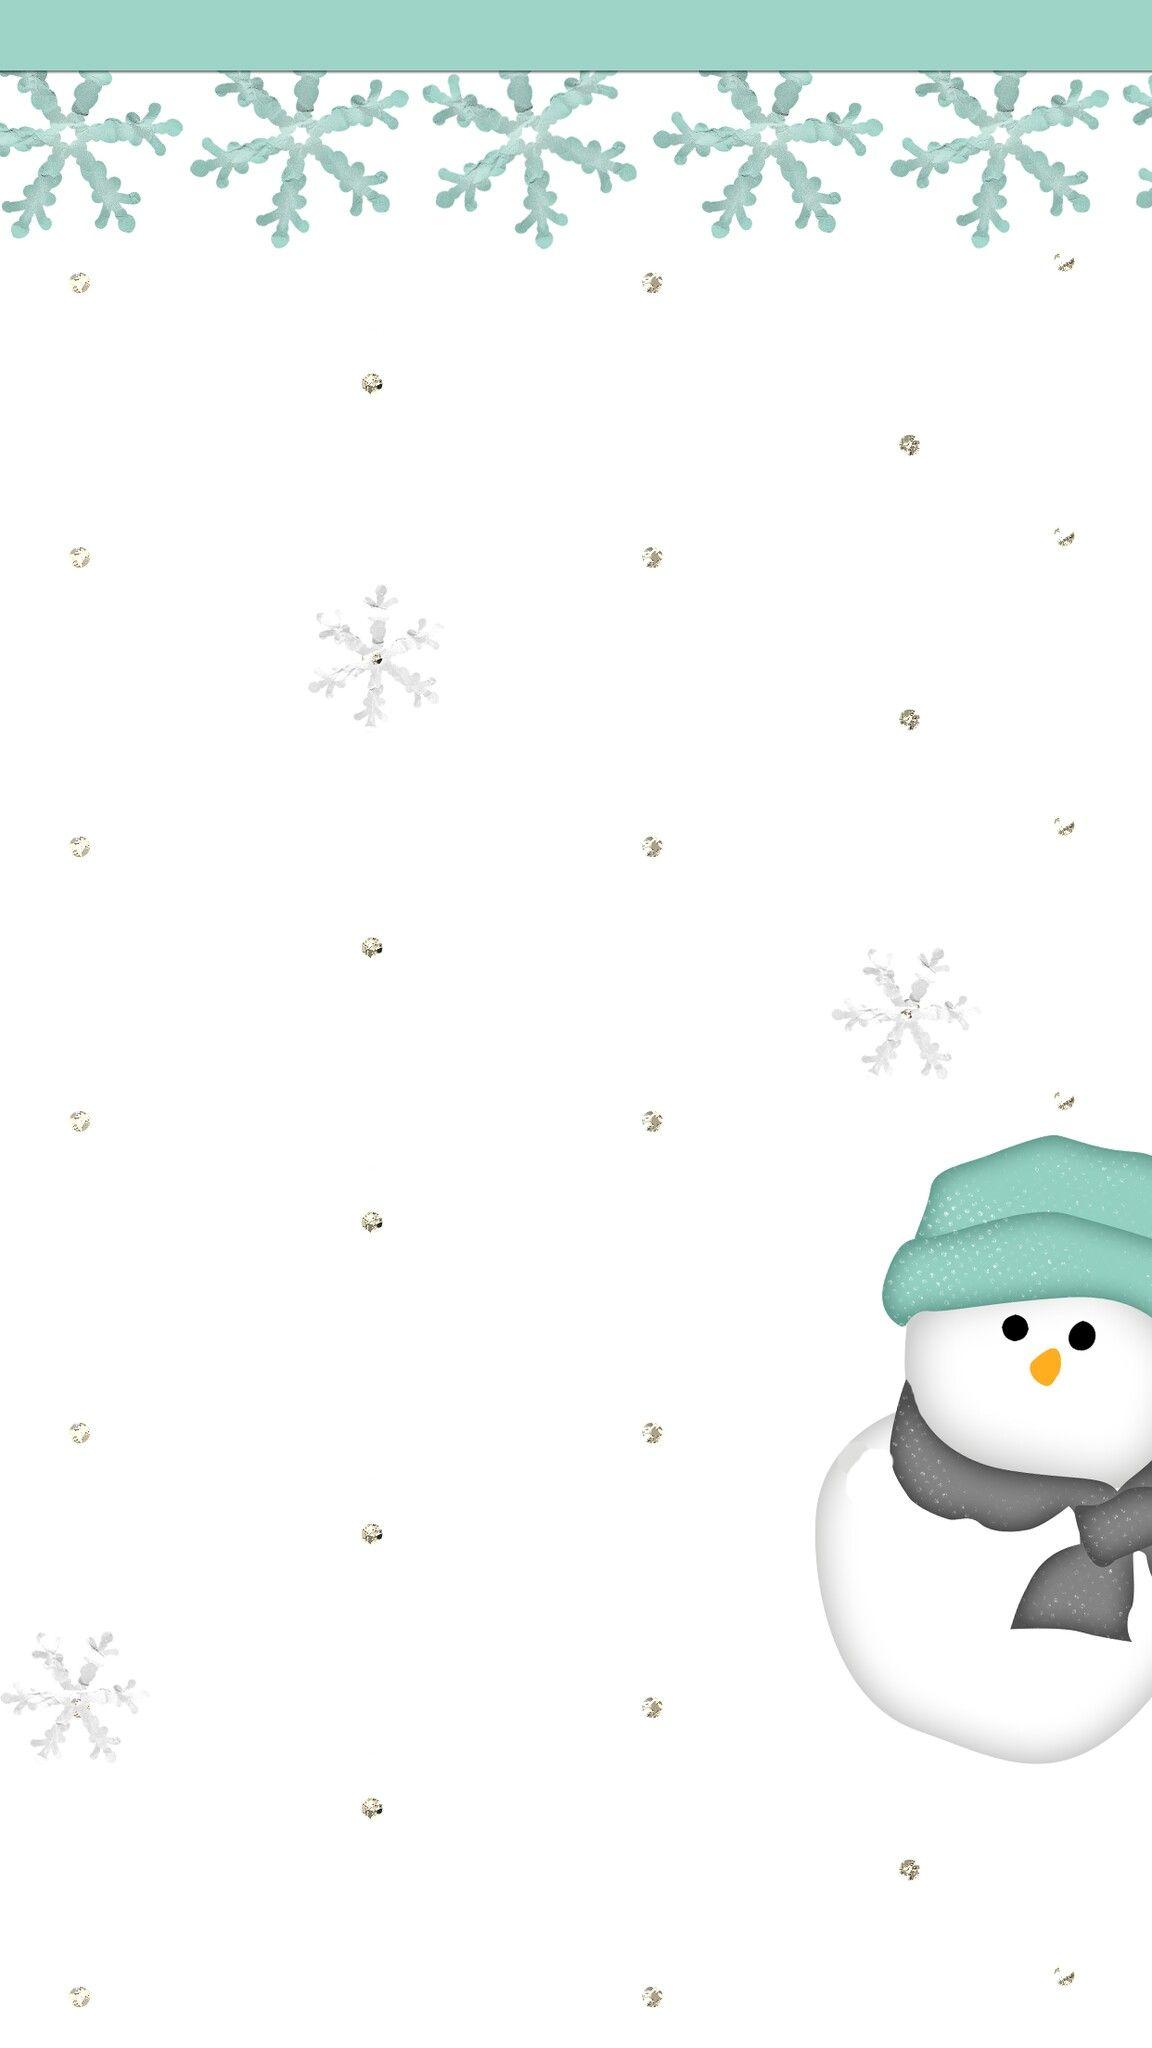 Snowman Iphone Wallpapers Top Free Snowman Iphone Backgrounds Wallpaperaccess